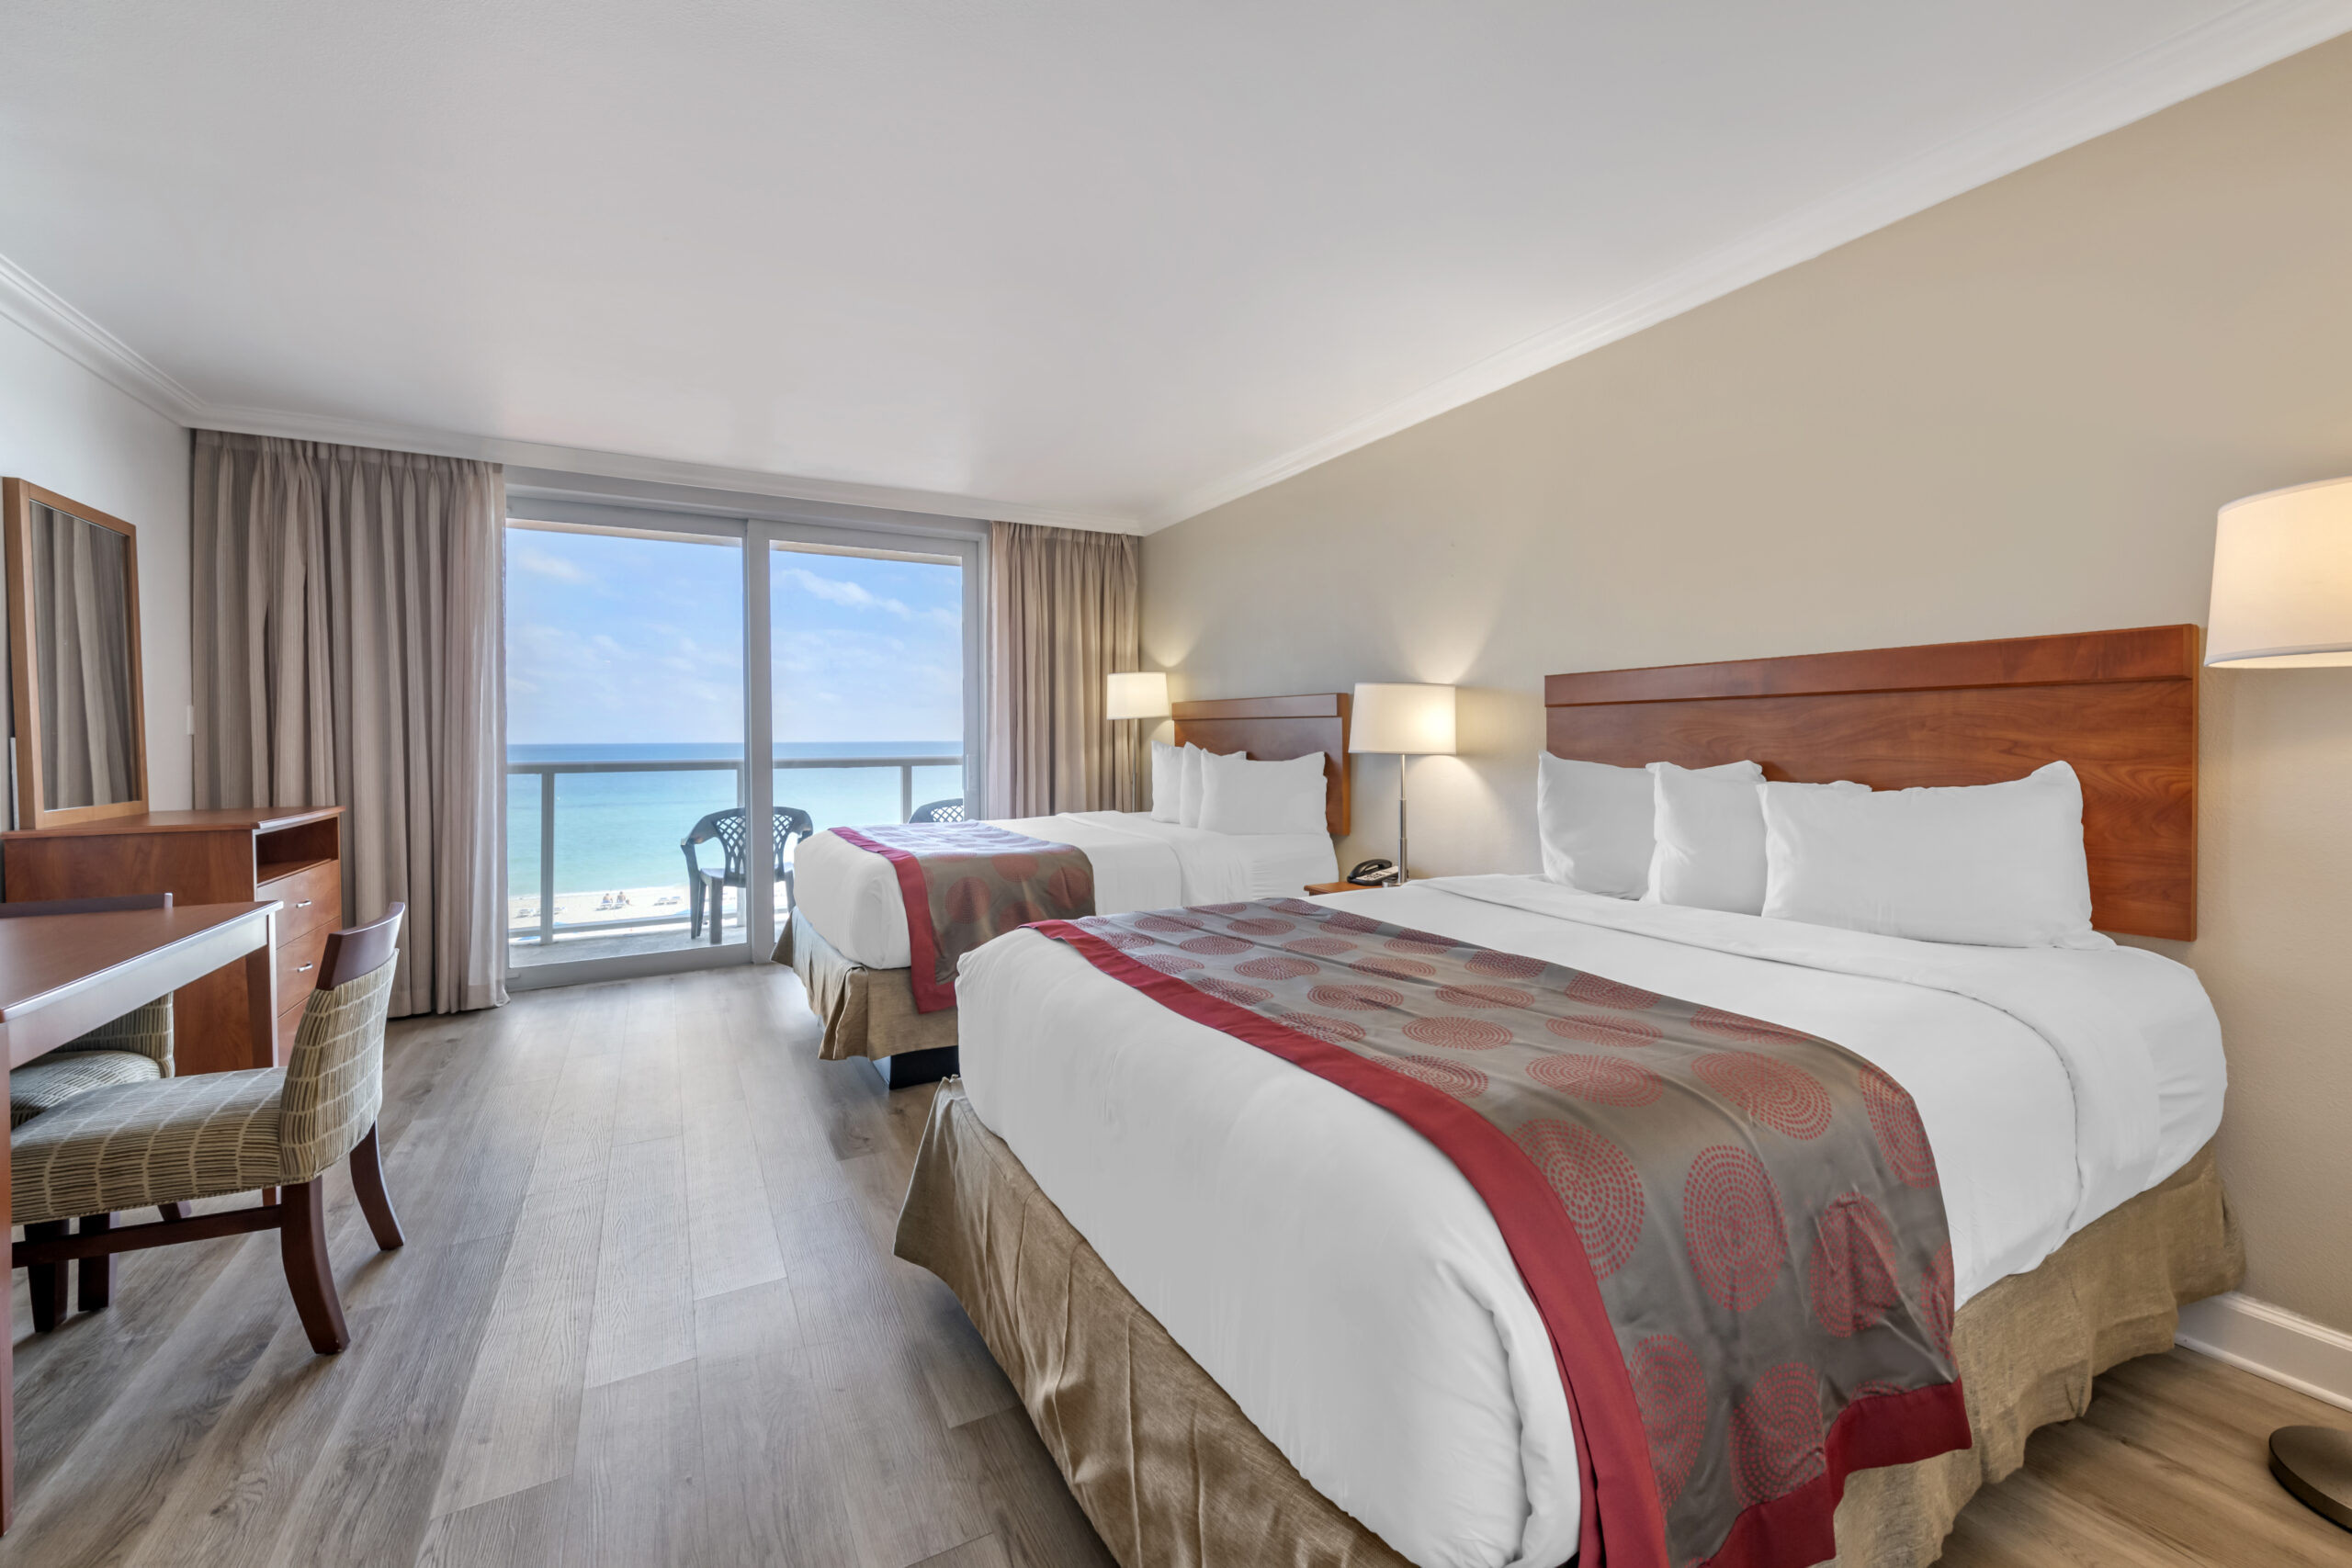 An oceanfront room at the Ramada Plaza by Wyndham Marco Polo Beach Resort & Hotel in Sunny Isles Beach, Florida